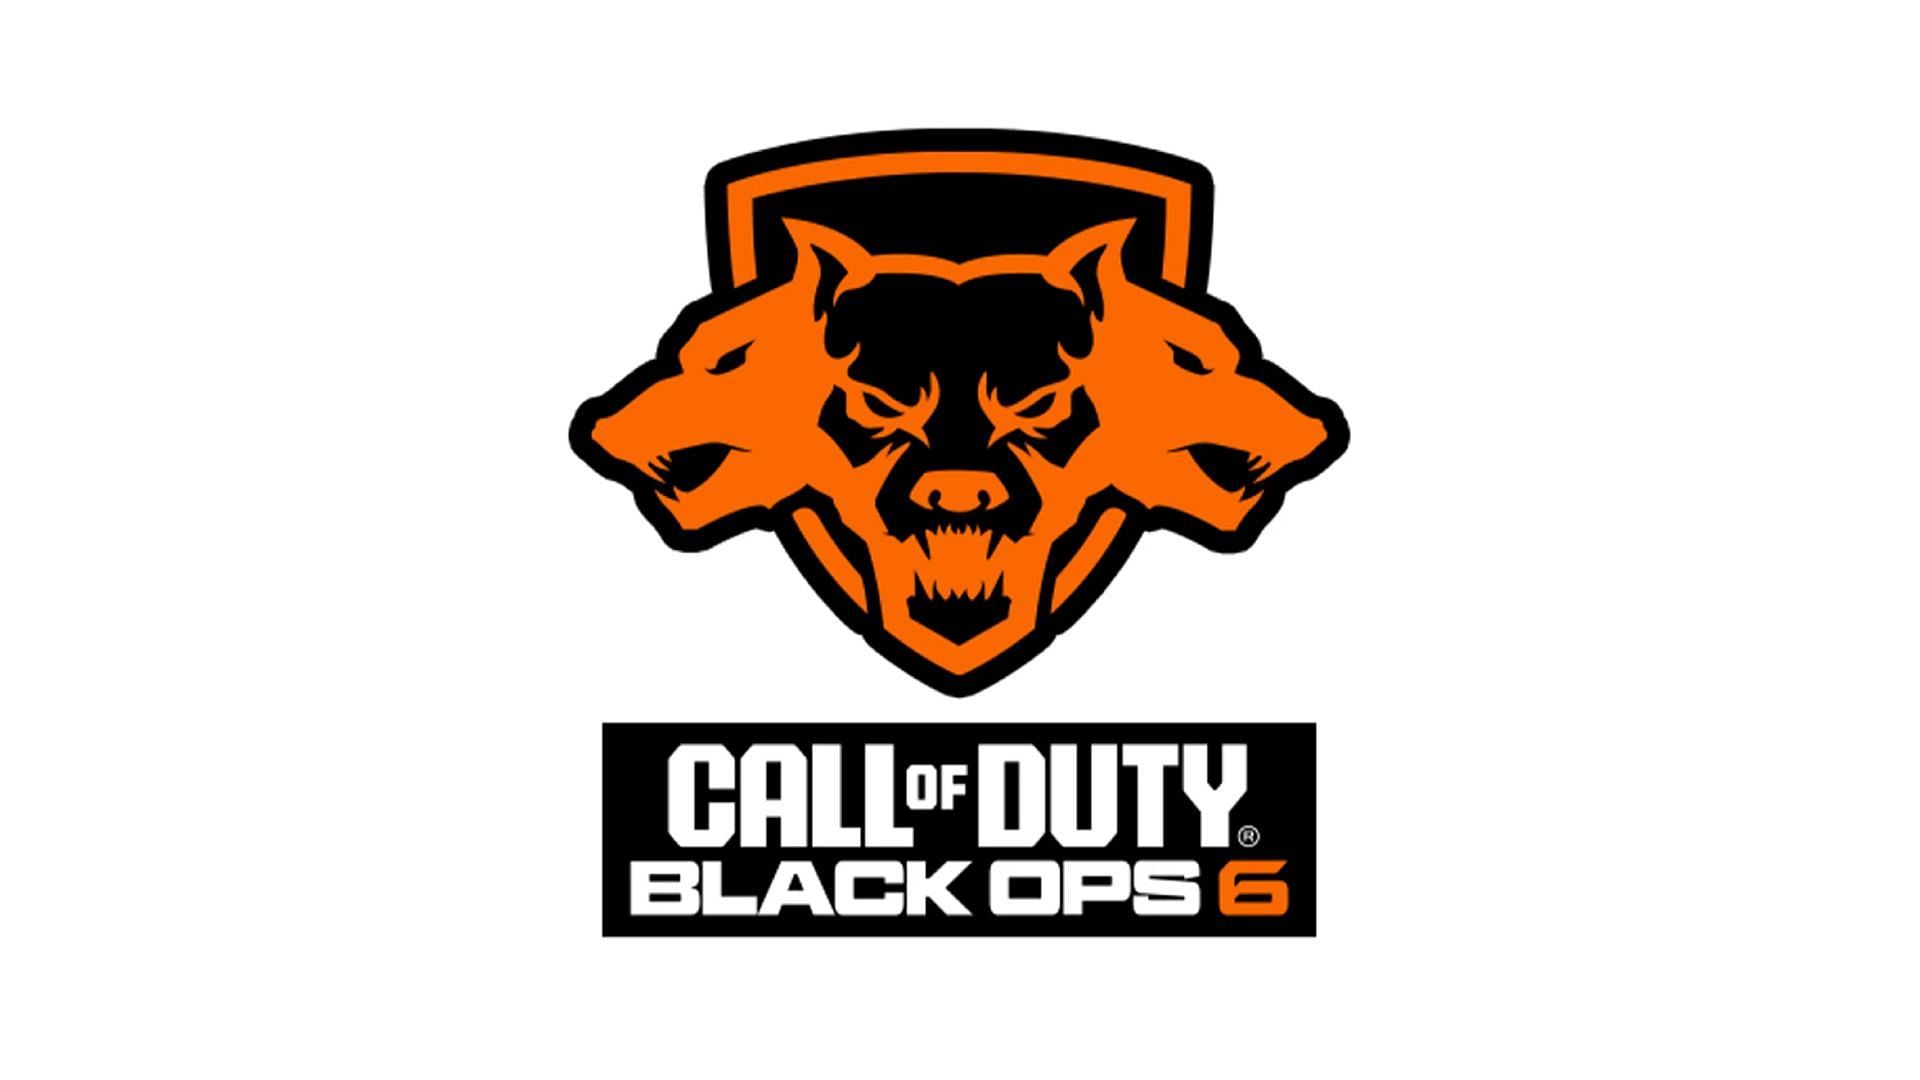 Black Ops 6 Decal (Image via Activision)